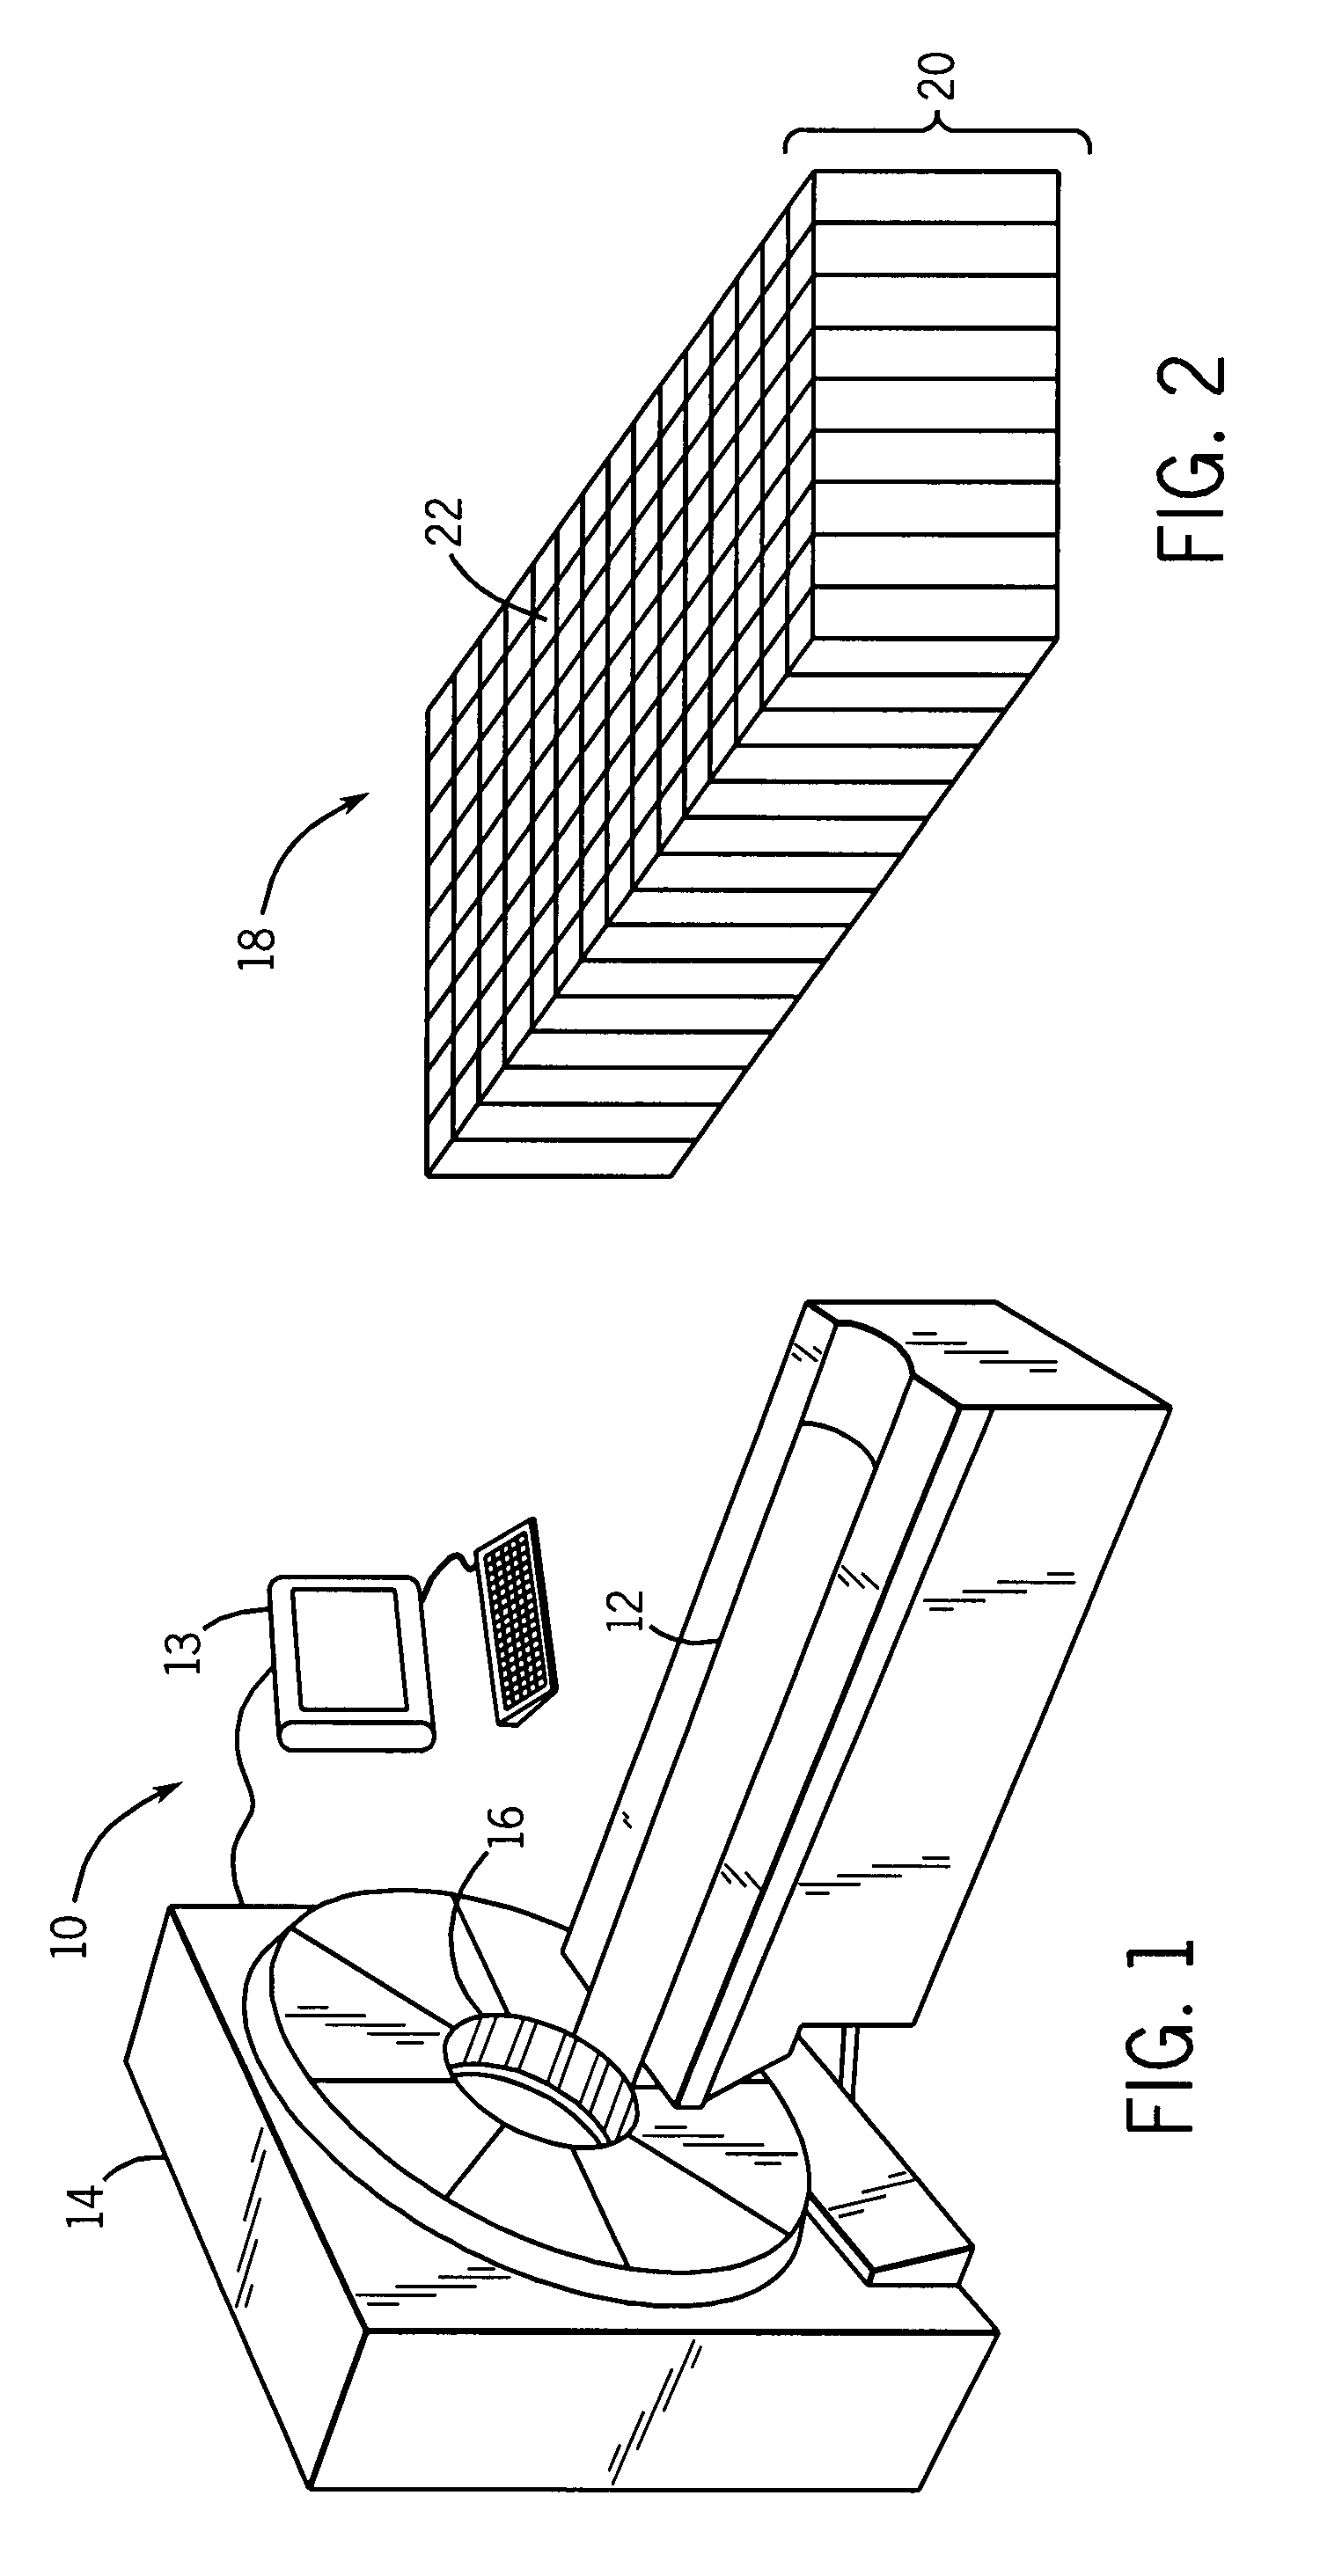 Nano-scale metal halide scintillation materials and methods for making same